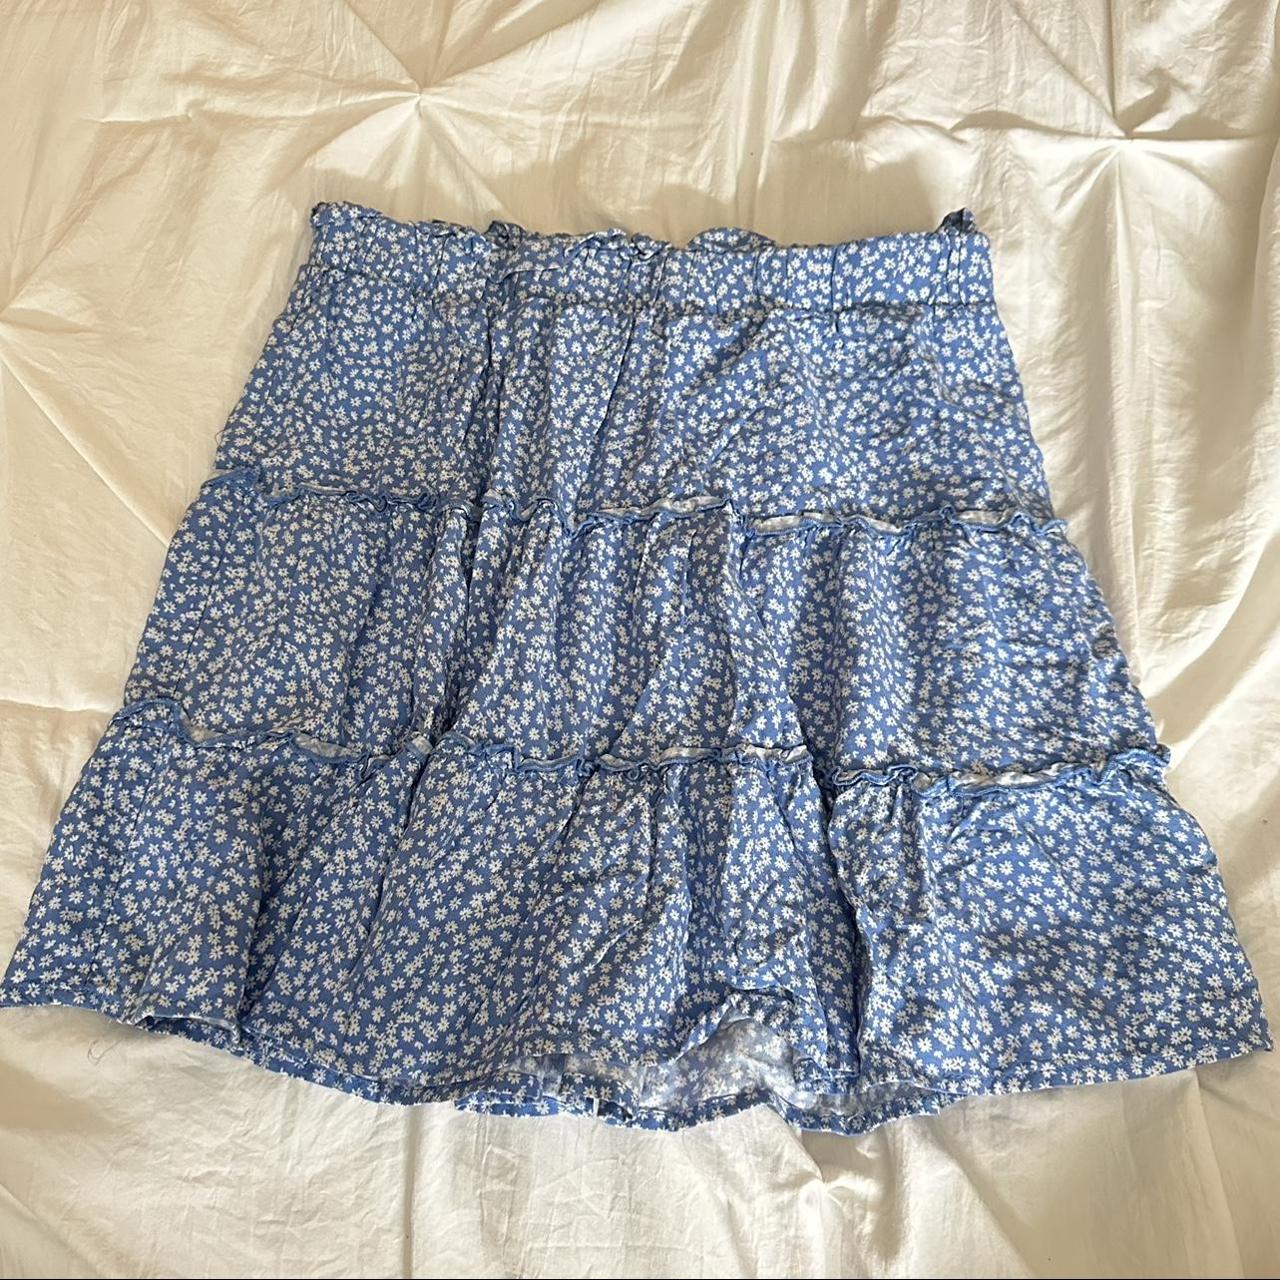 Wild fable blue floral skirt- Practically never... - Depop